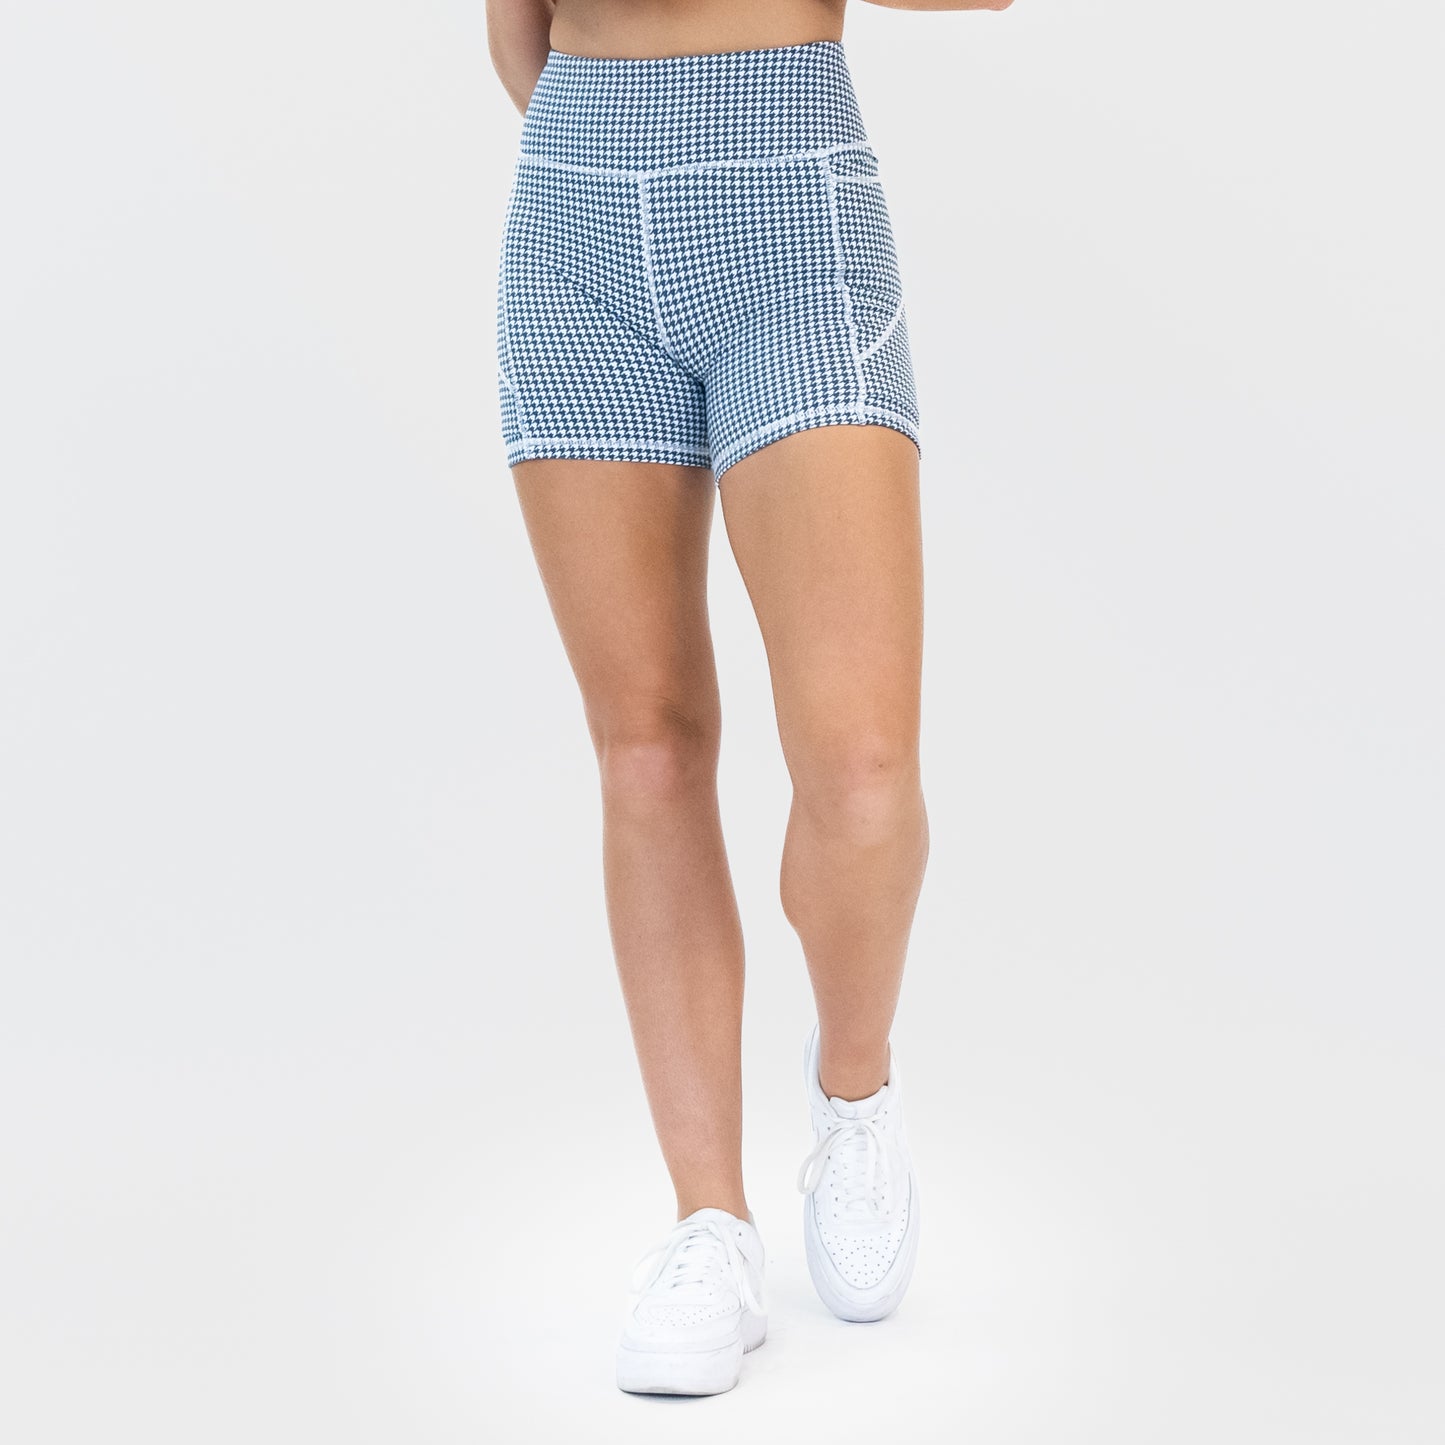 Lux Baseline Shorts (5 in. inseam) - Light Navy Houndstooth